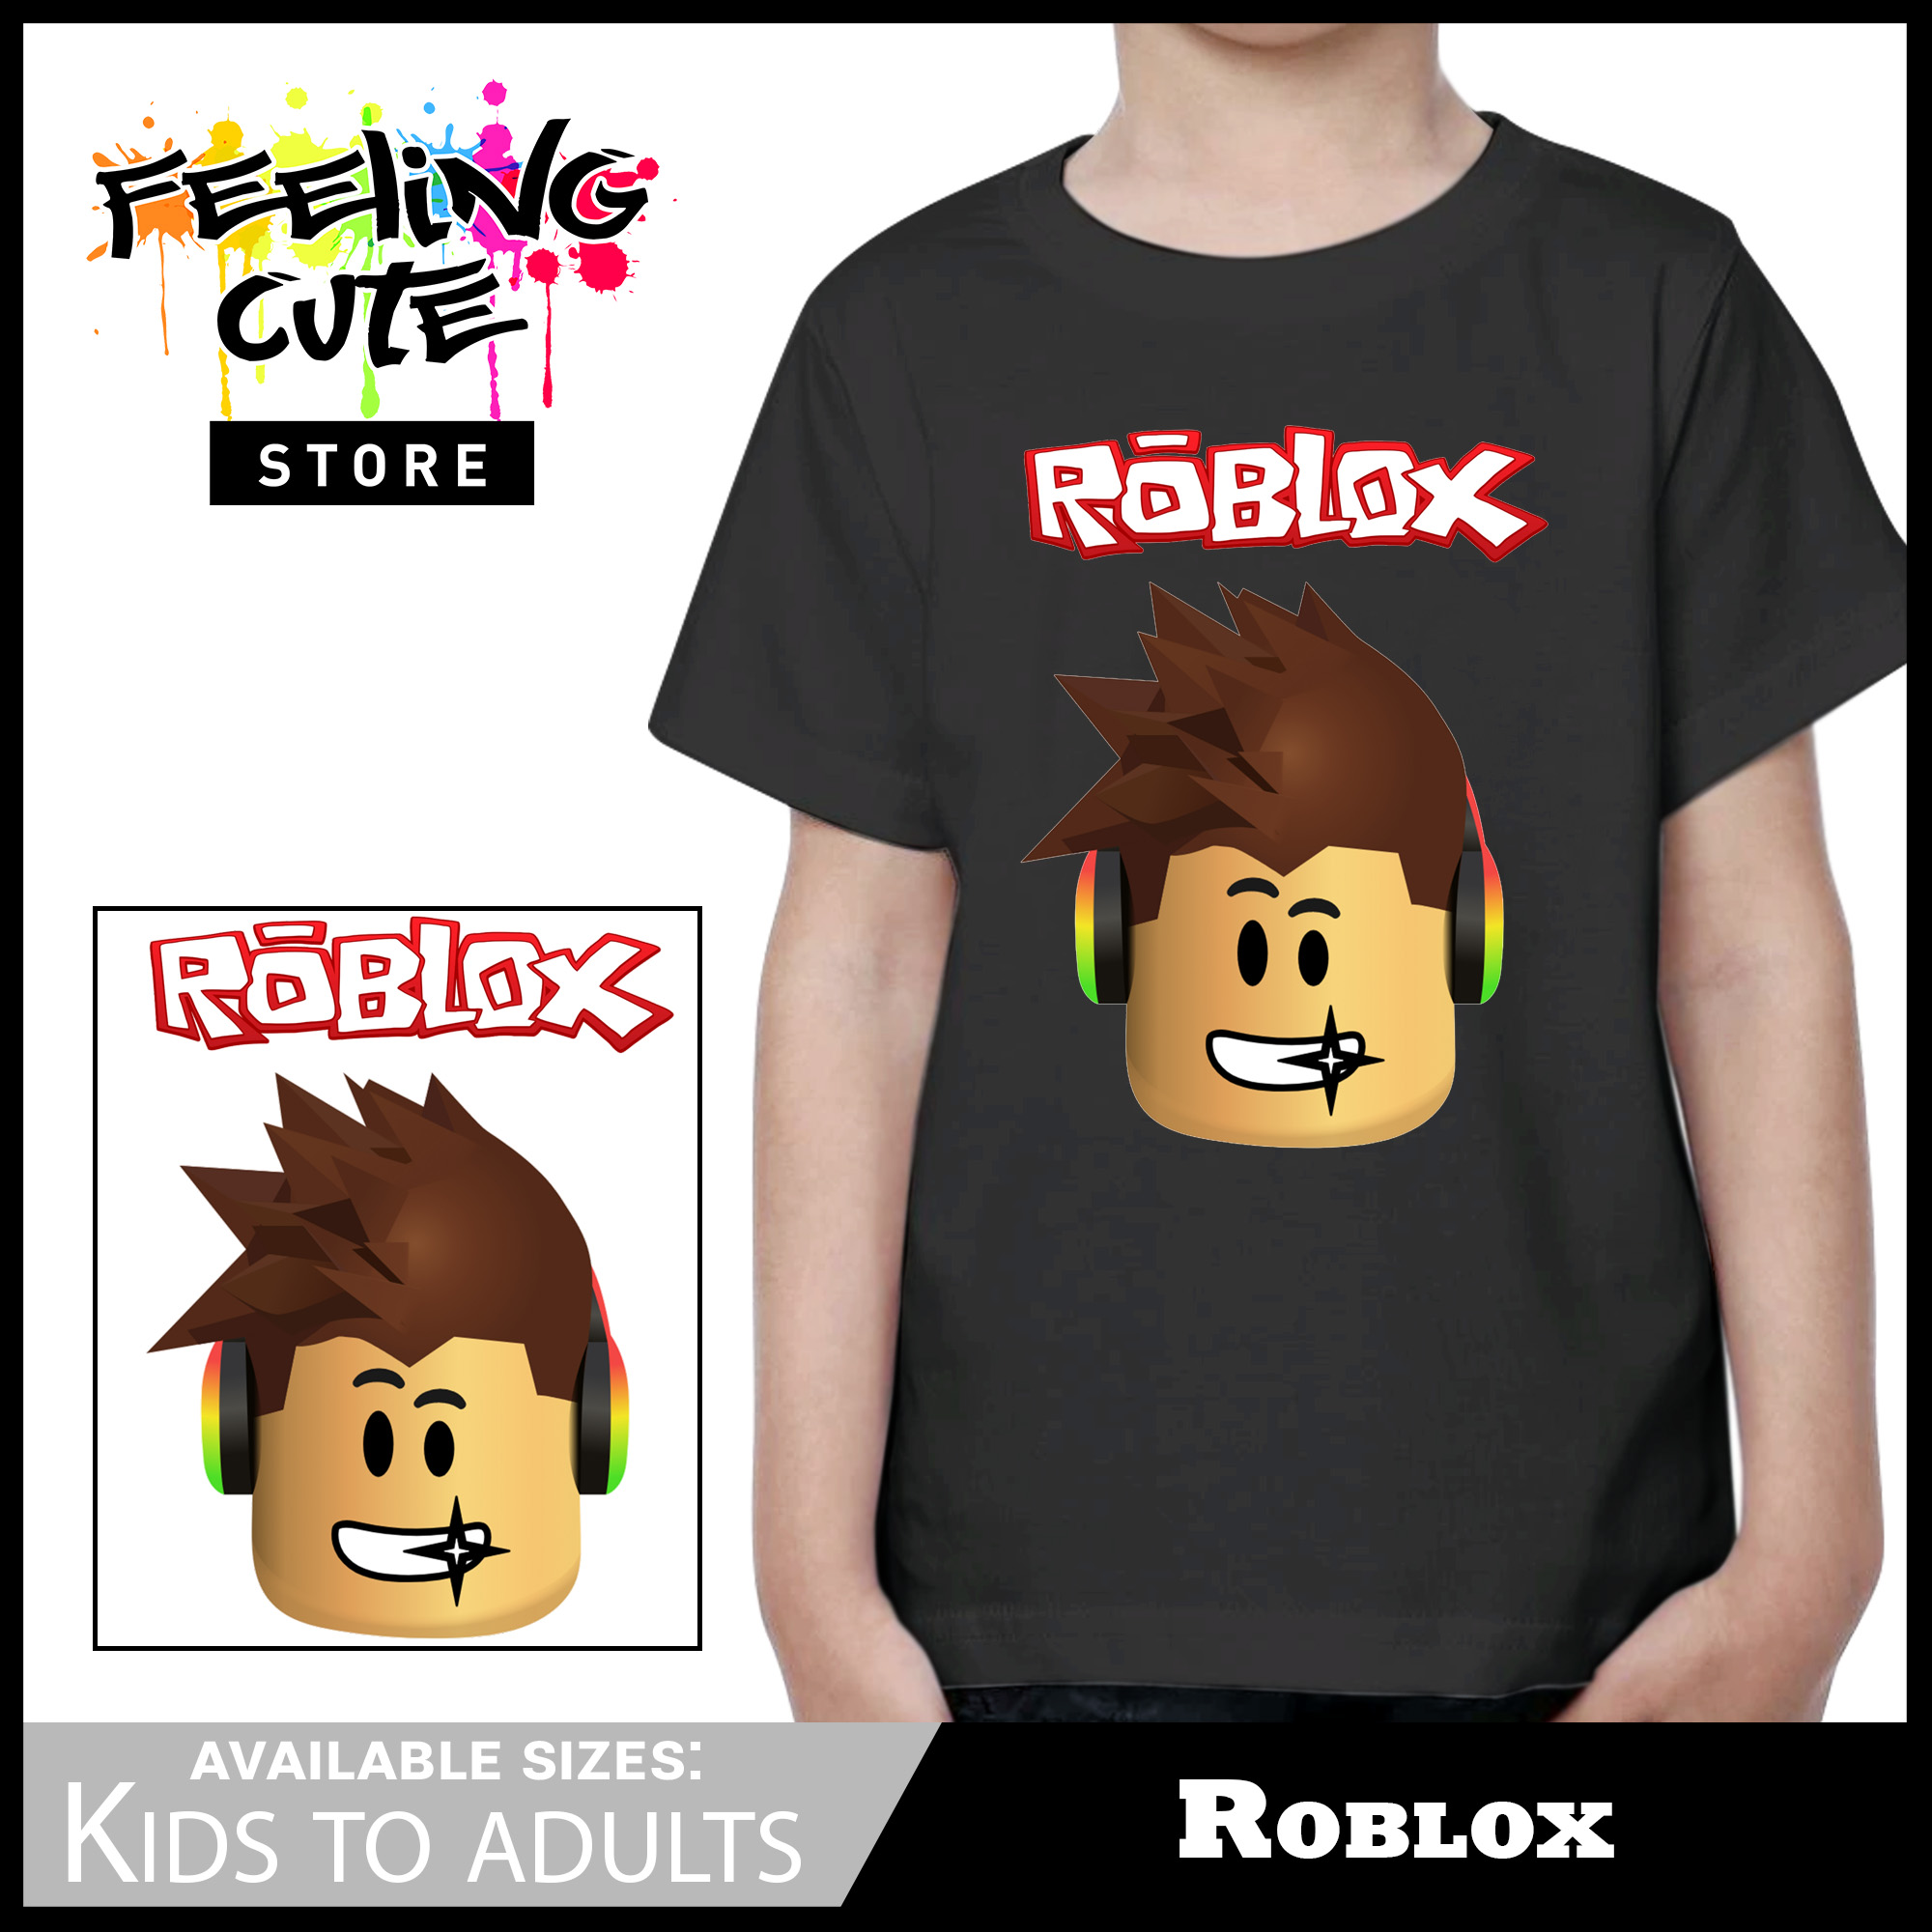 NWT Roblox Multi Character Space Graphic Black Cotton Tee Shirt